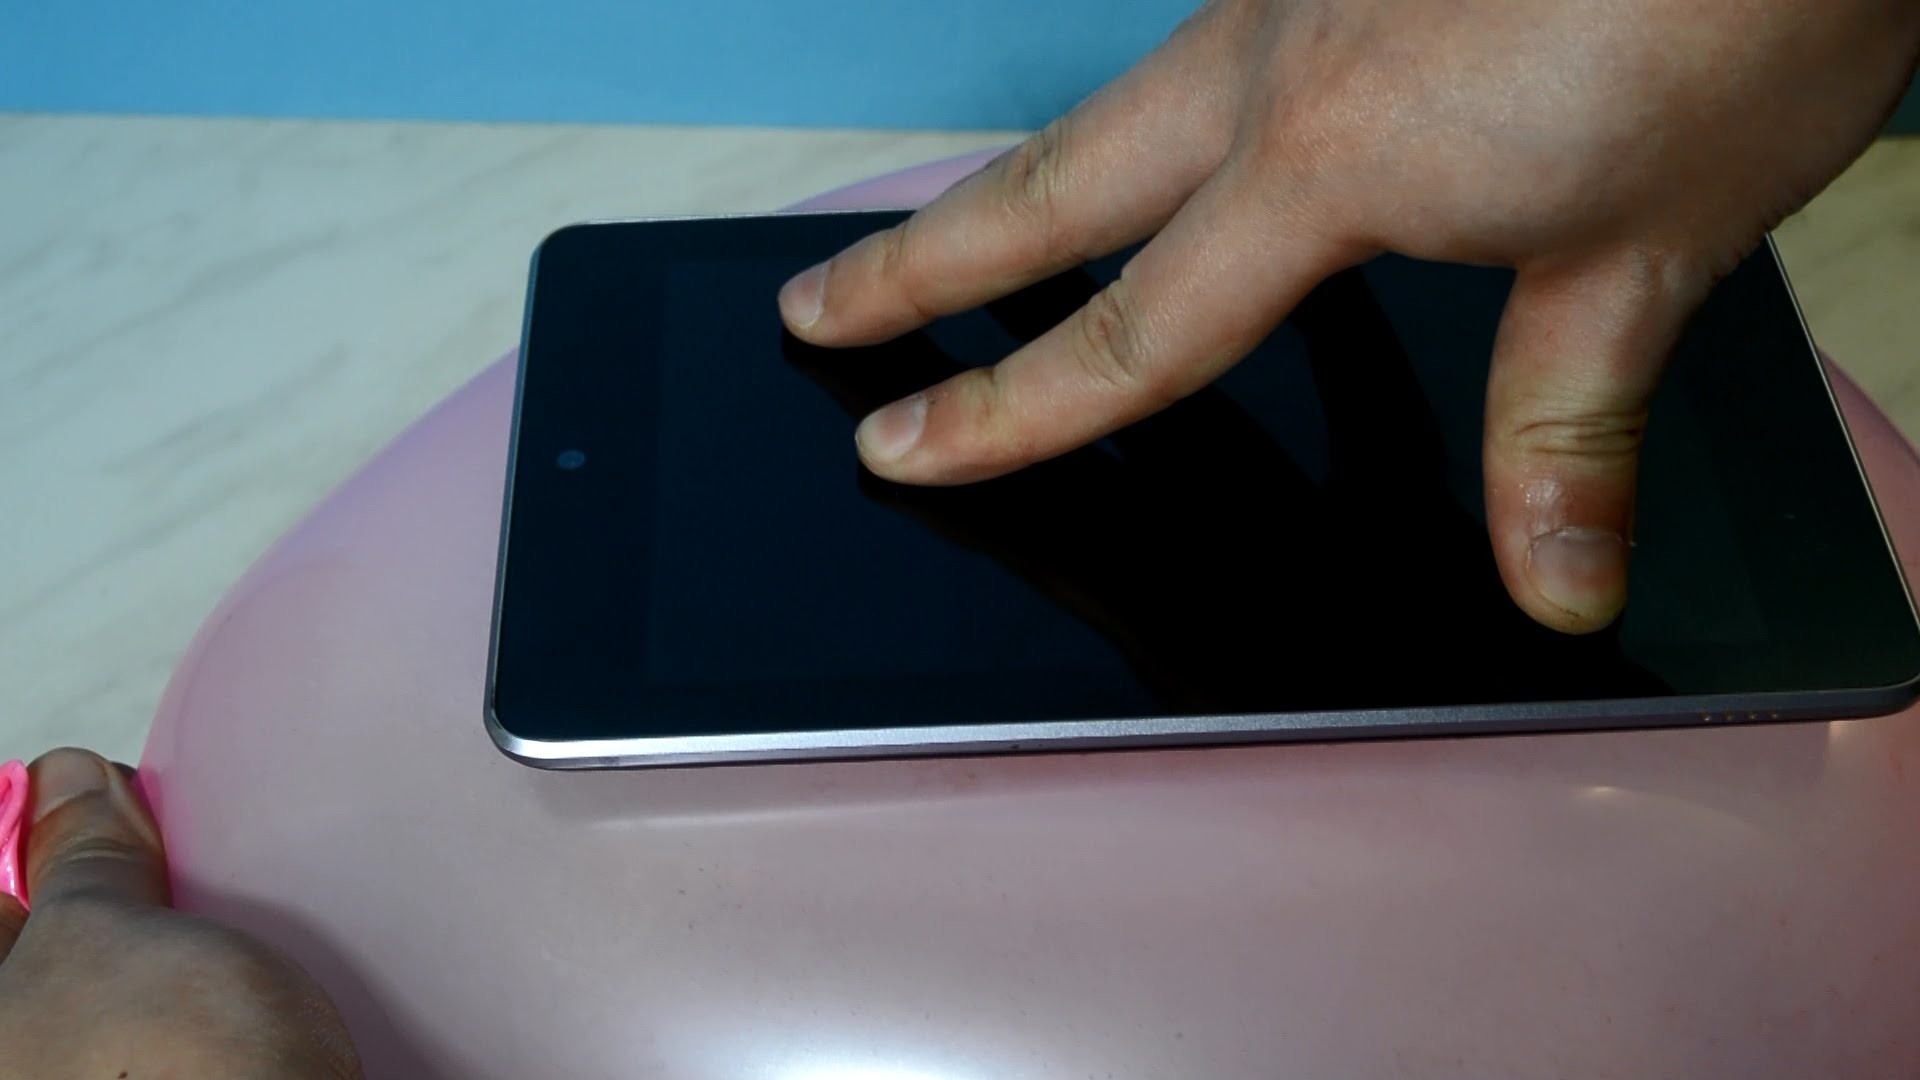 How To Make A Phone Tablet Case With A Balloon? Nexus 7 tablet case easy, simple, free